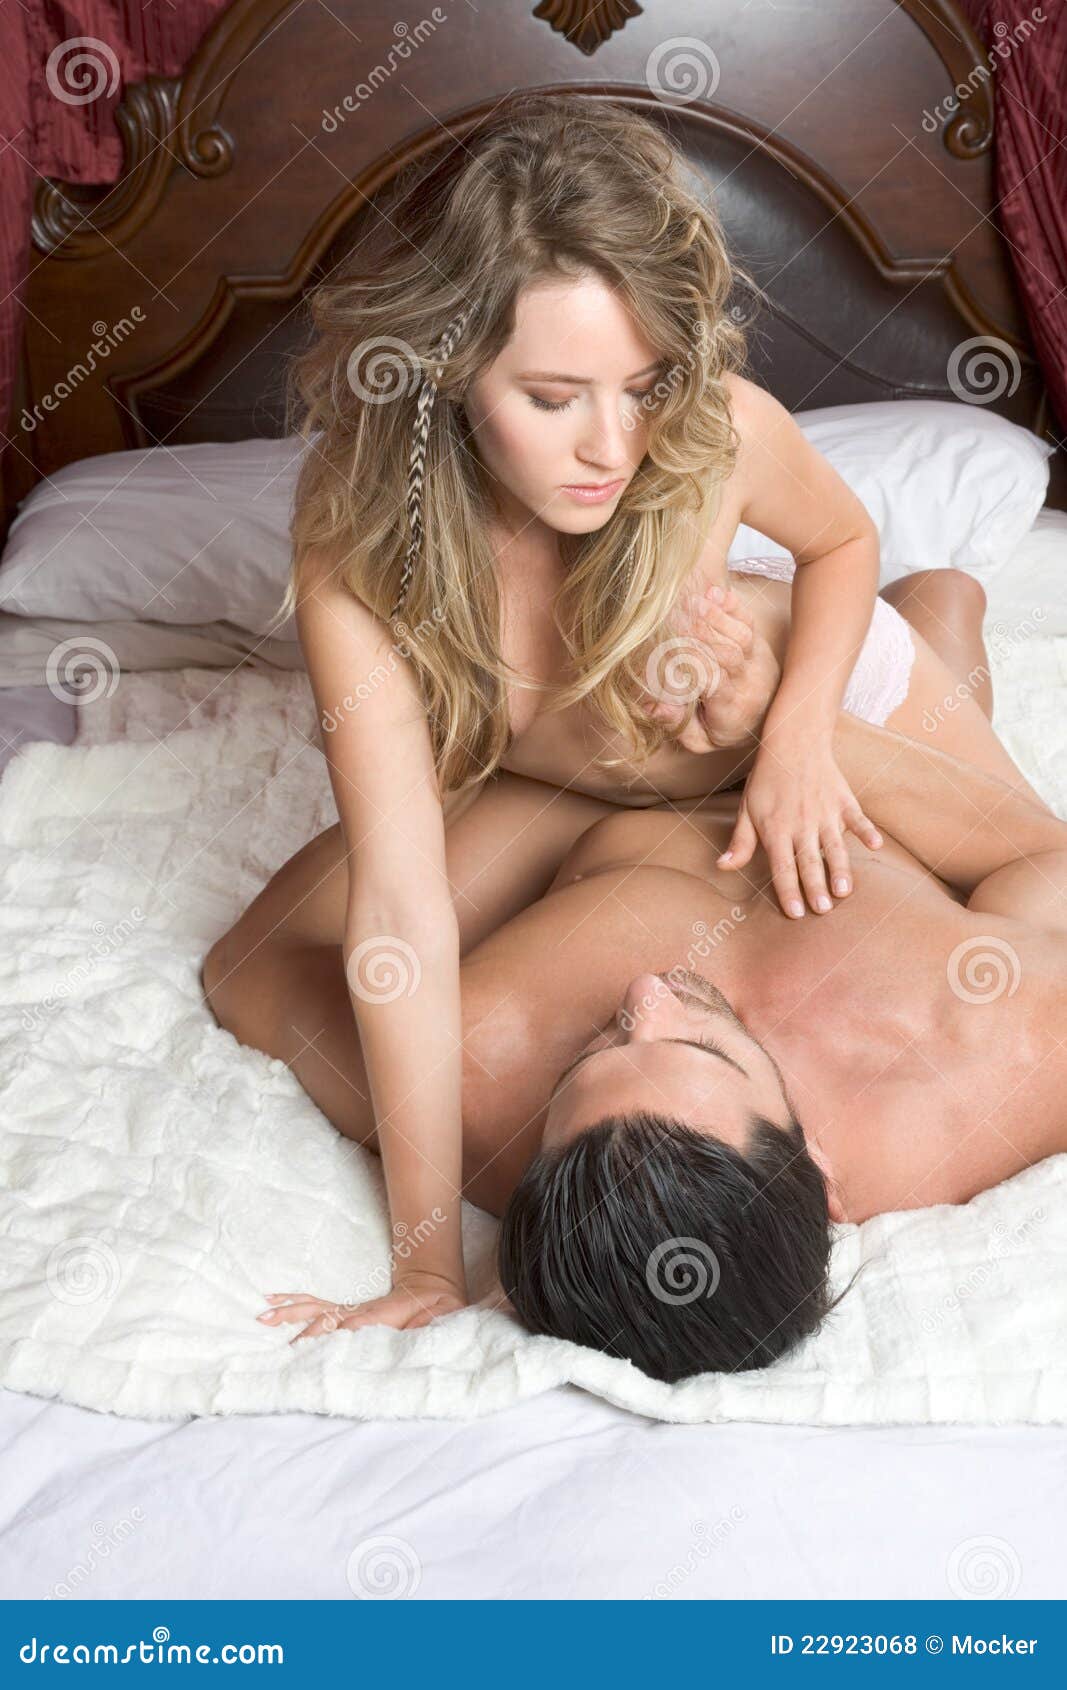 erotic couples images